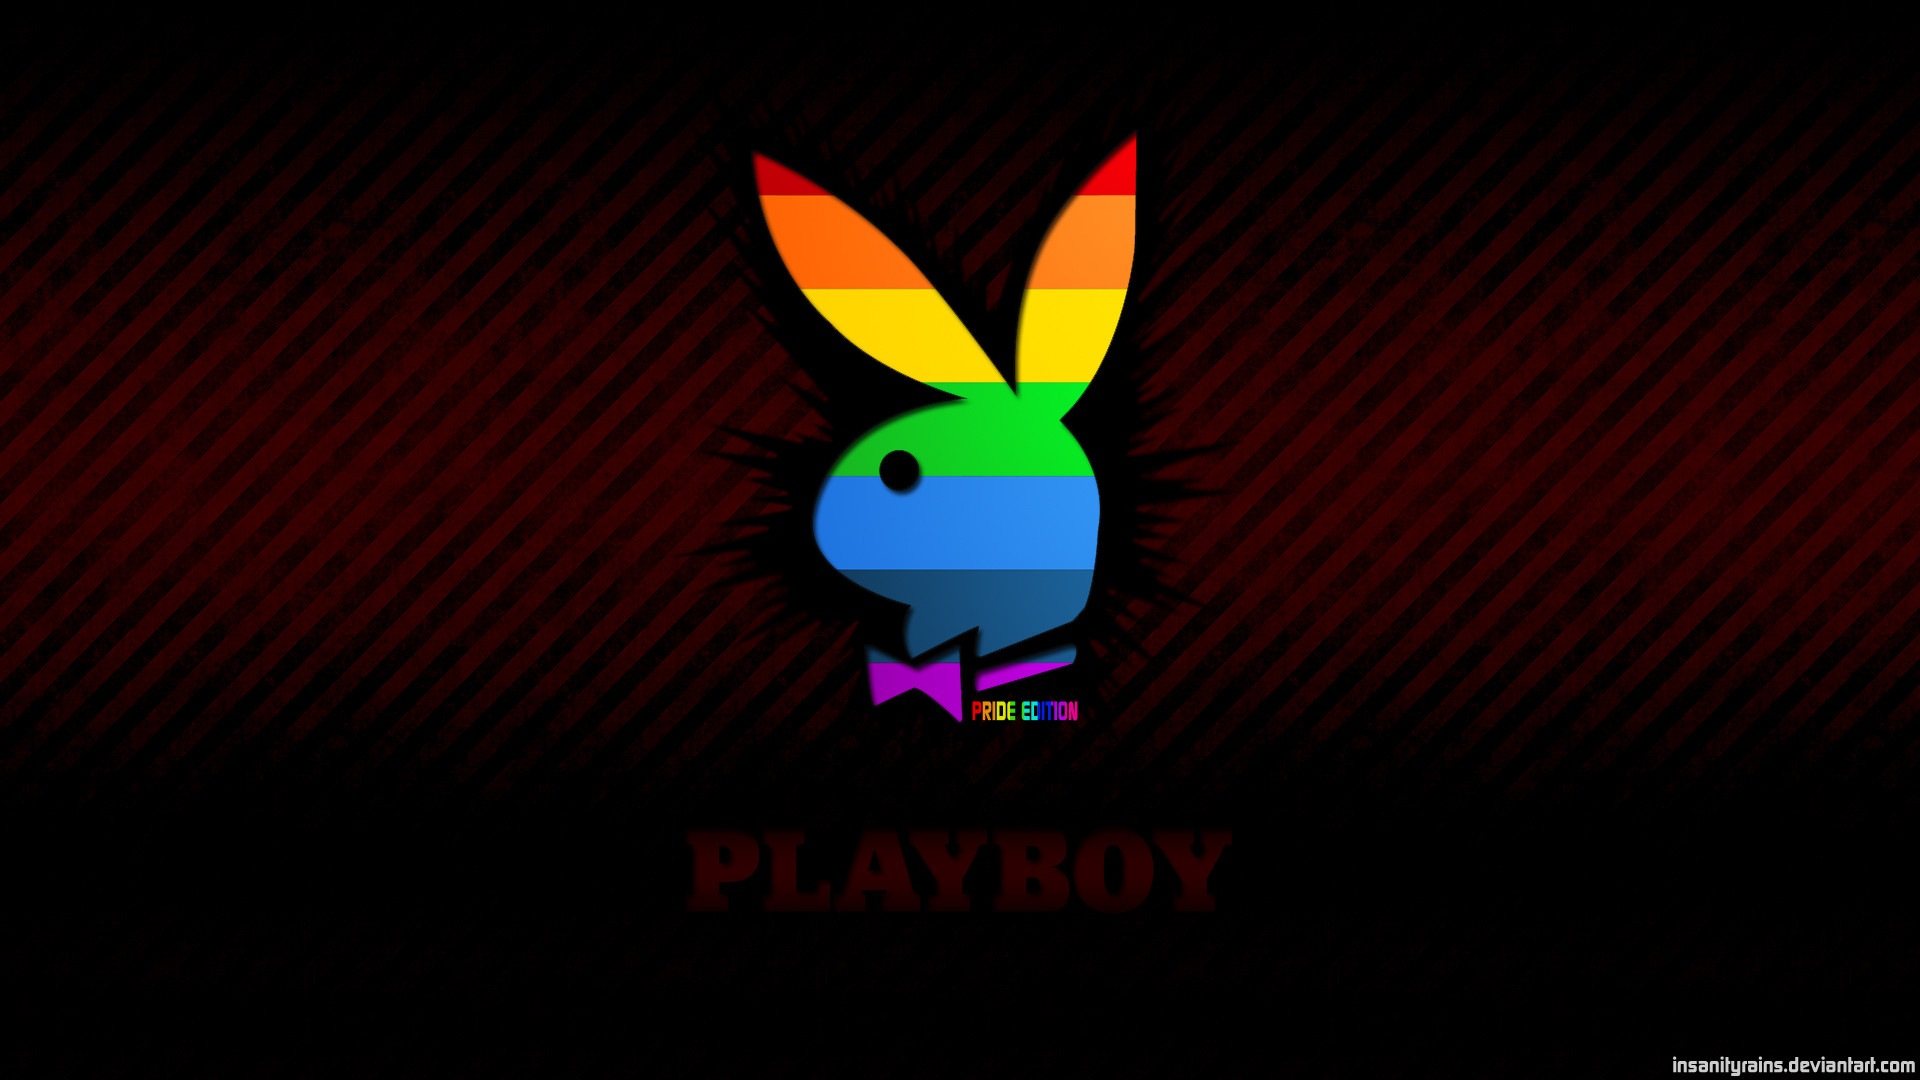 Playboy Iphone Wallpapers 11 Wallpapers Adorable Wallpapers 1920x1080